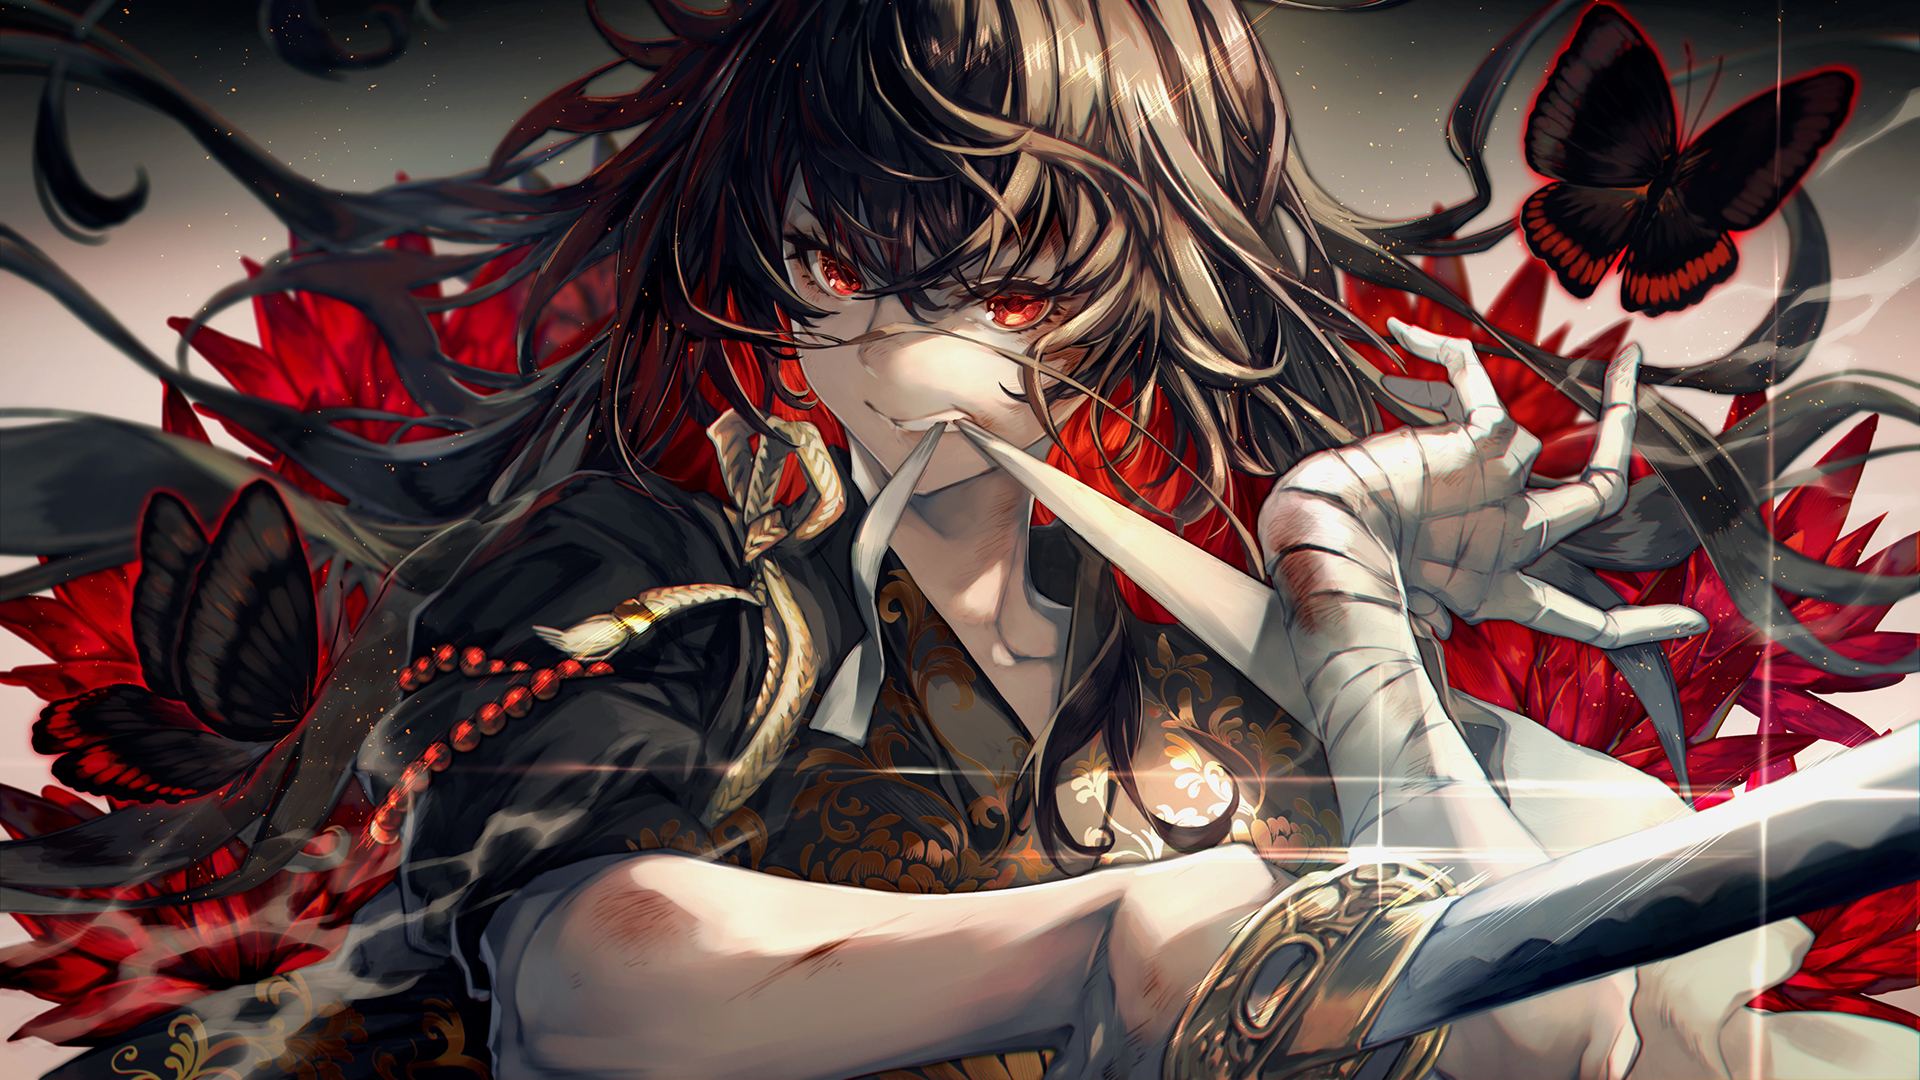 Long Hair Red Eyes Sword Black Hair Red Flowers Red Leaves Bandage Butterfly Anime 1920x1080